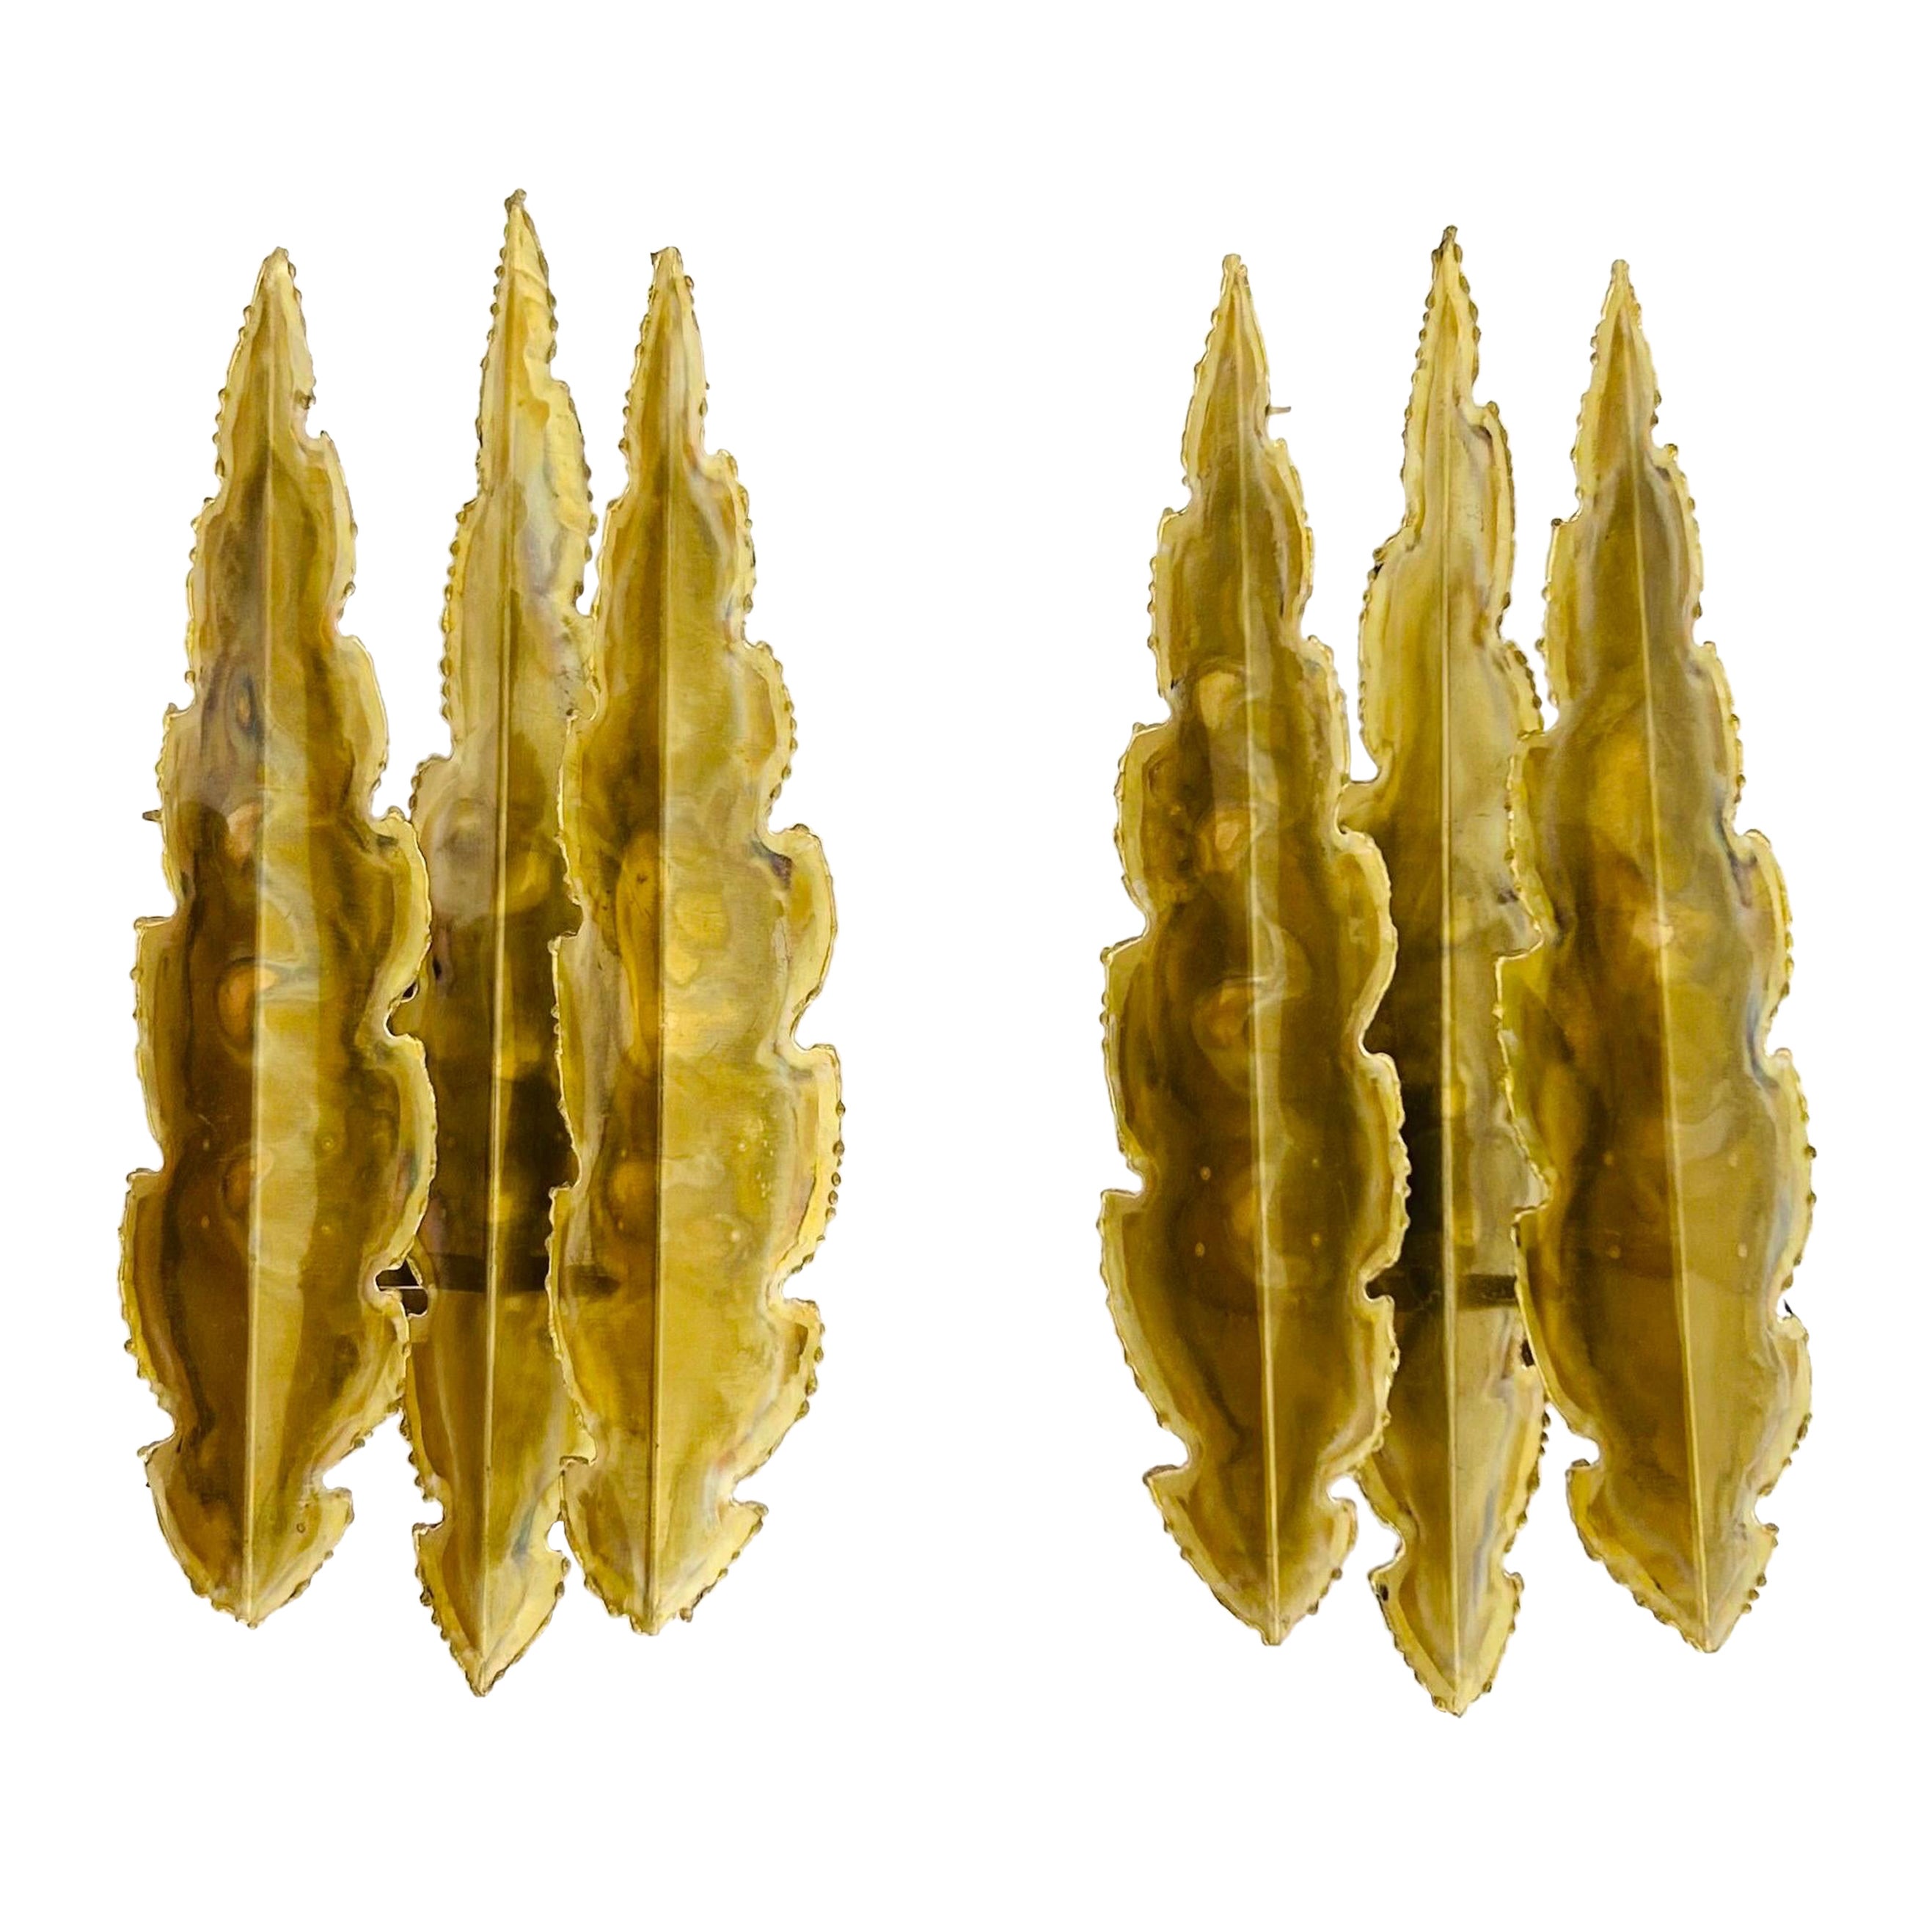 Pair of Leaf-Shaped Brass Wall Lamps by Svend Aage Holm Sorensen, 1960s, Denmark For Sale